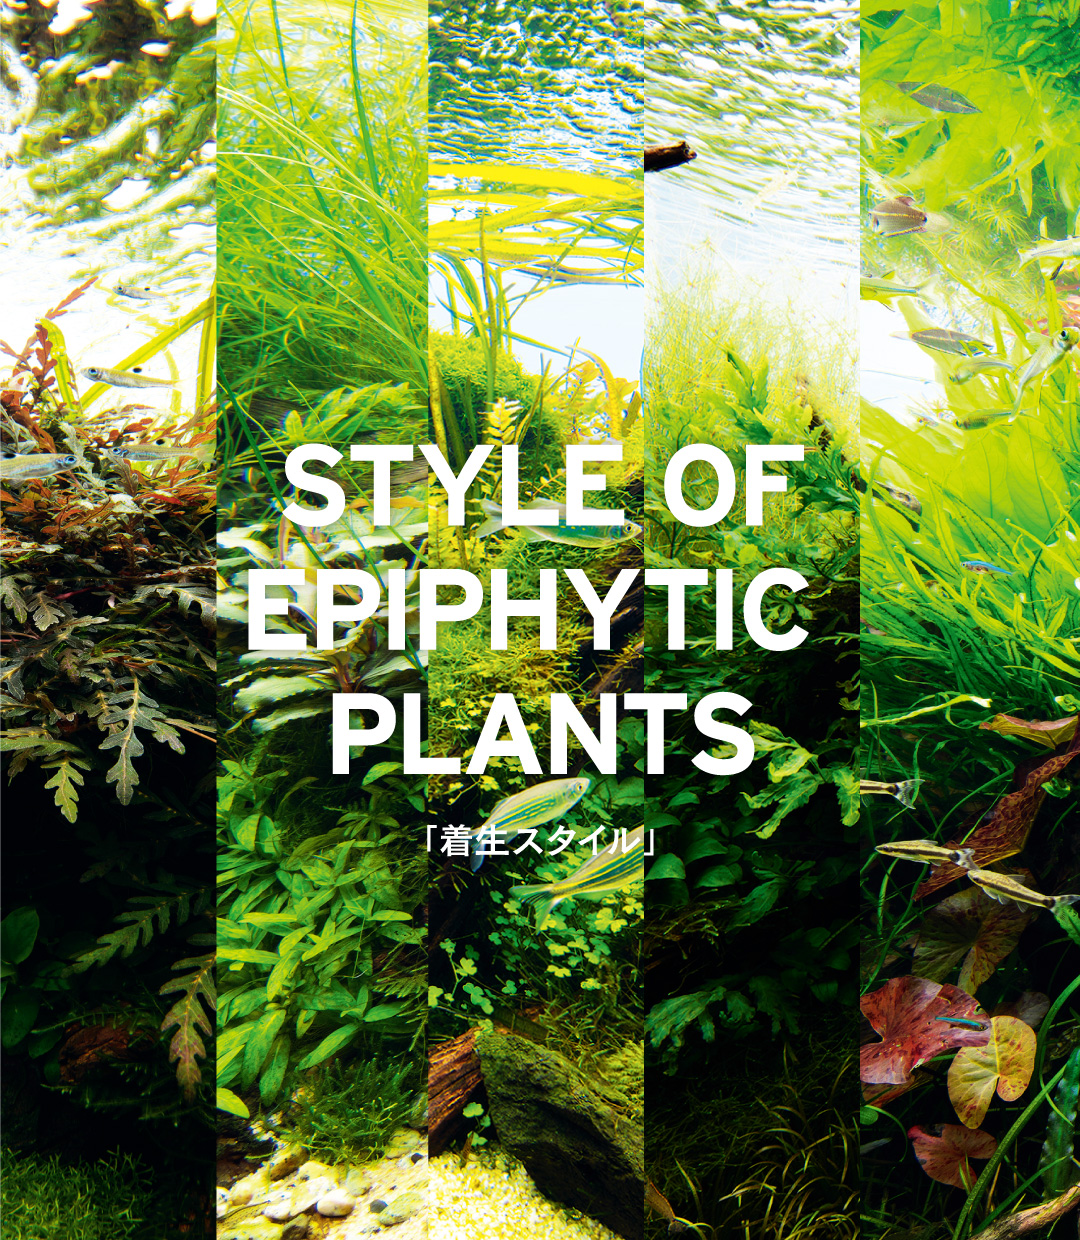 [ STYLE OF EPIPHYTIC PLANTS ] Effective use of epiphytic aquatic plants in layout scenes